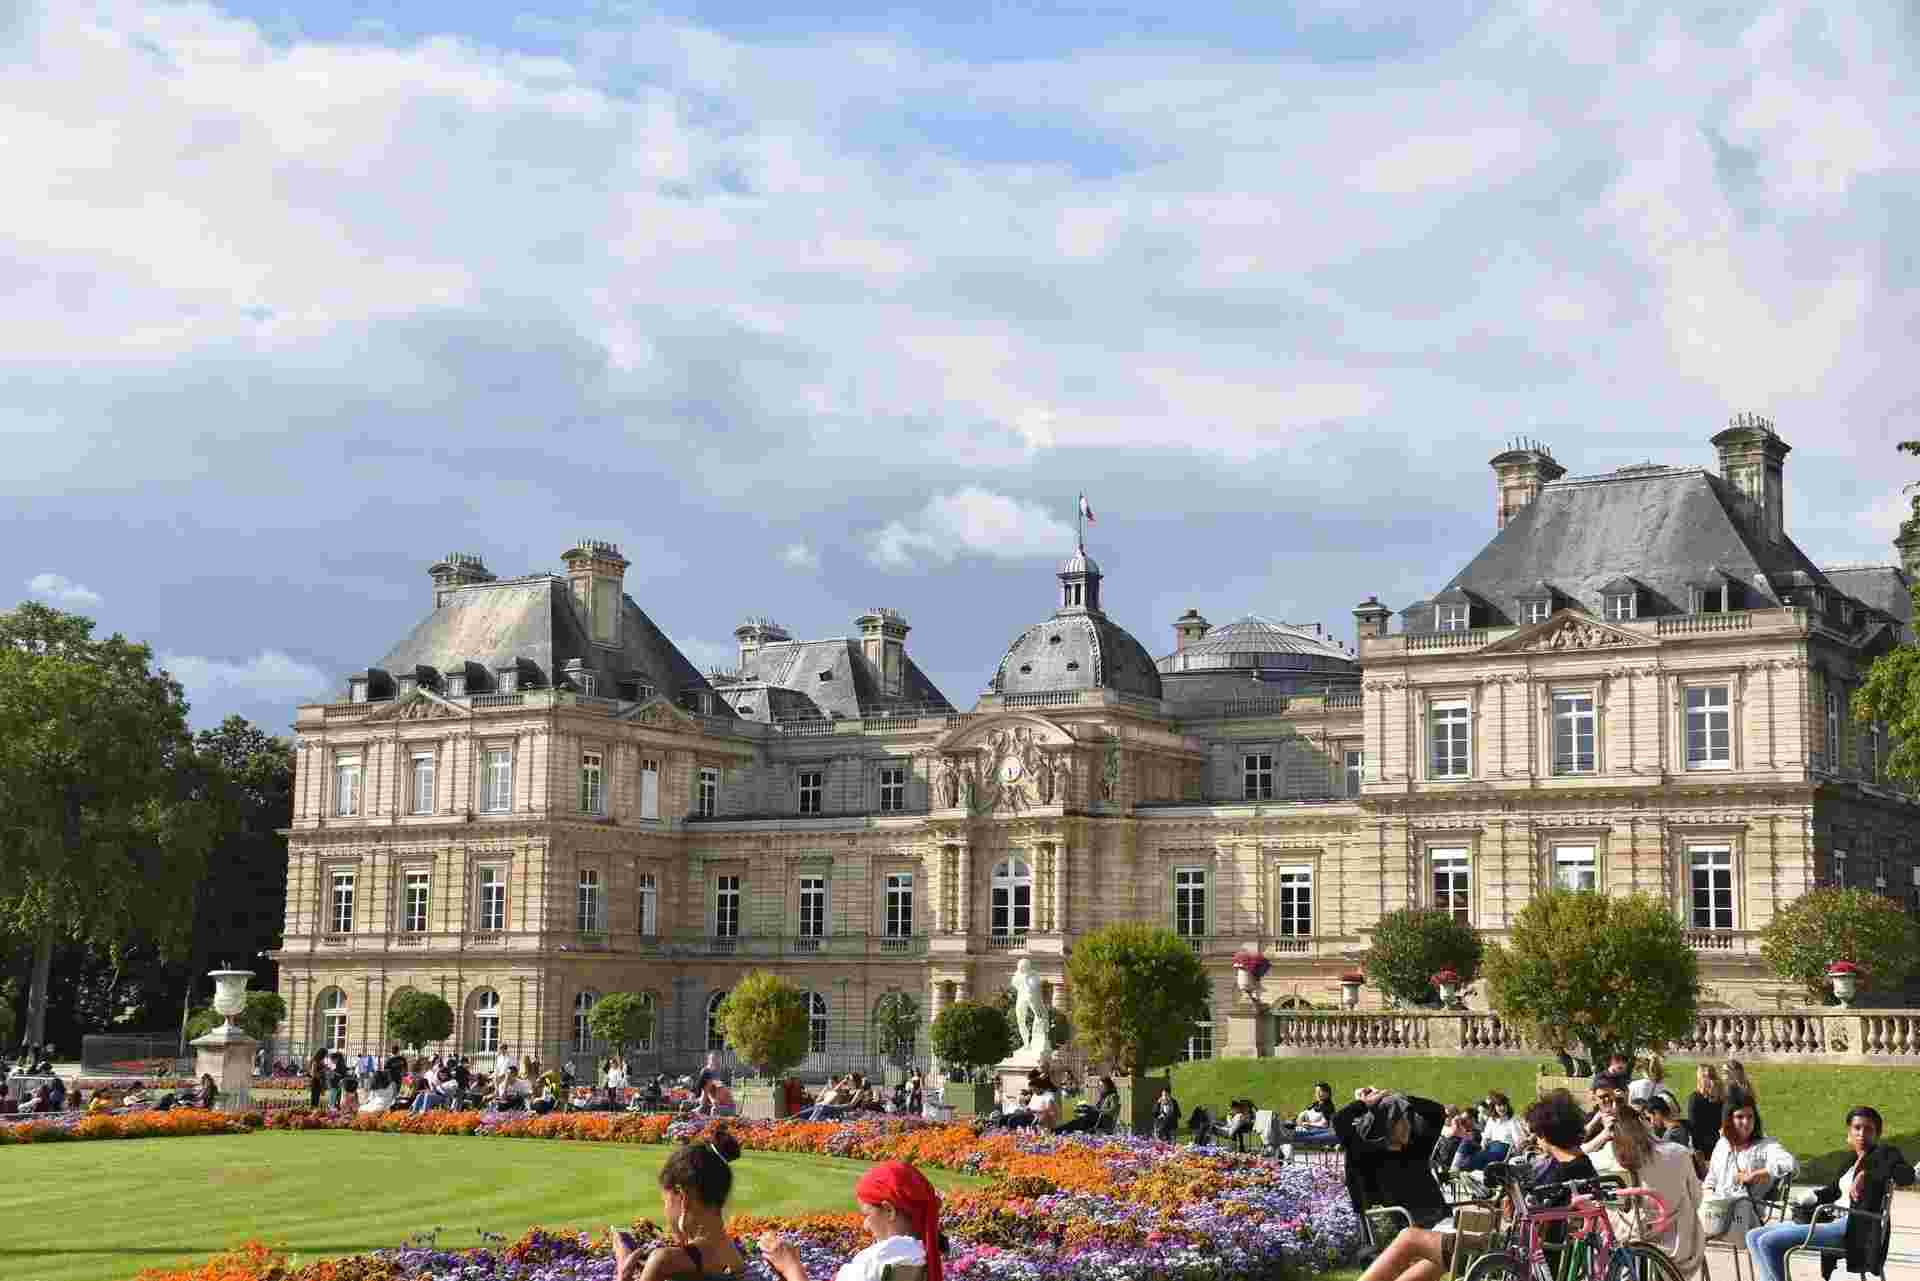 The Grand Ducal Palace serves as the reigning monarch’s authorized residence.